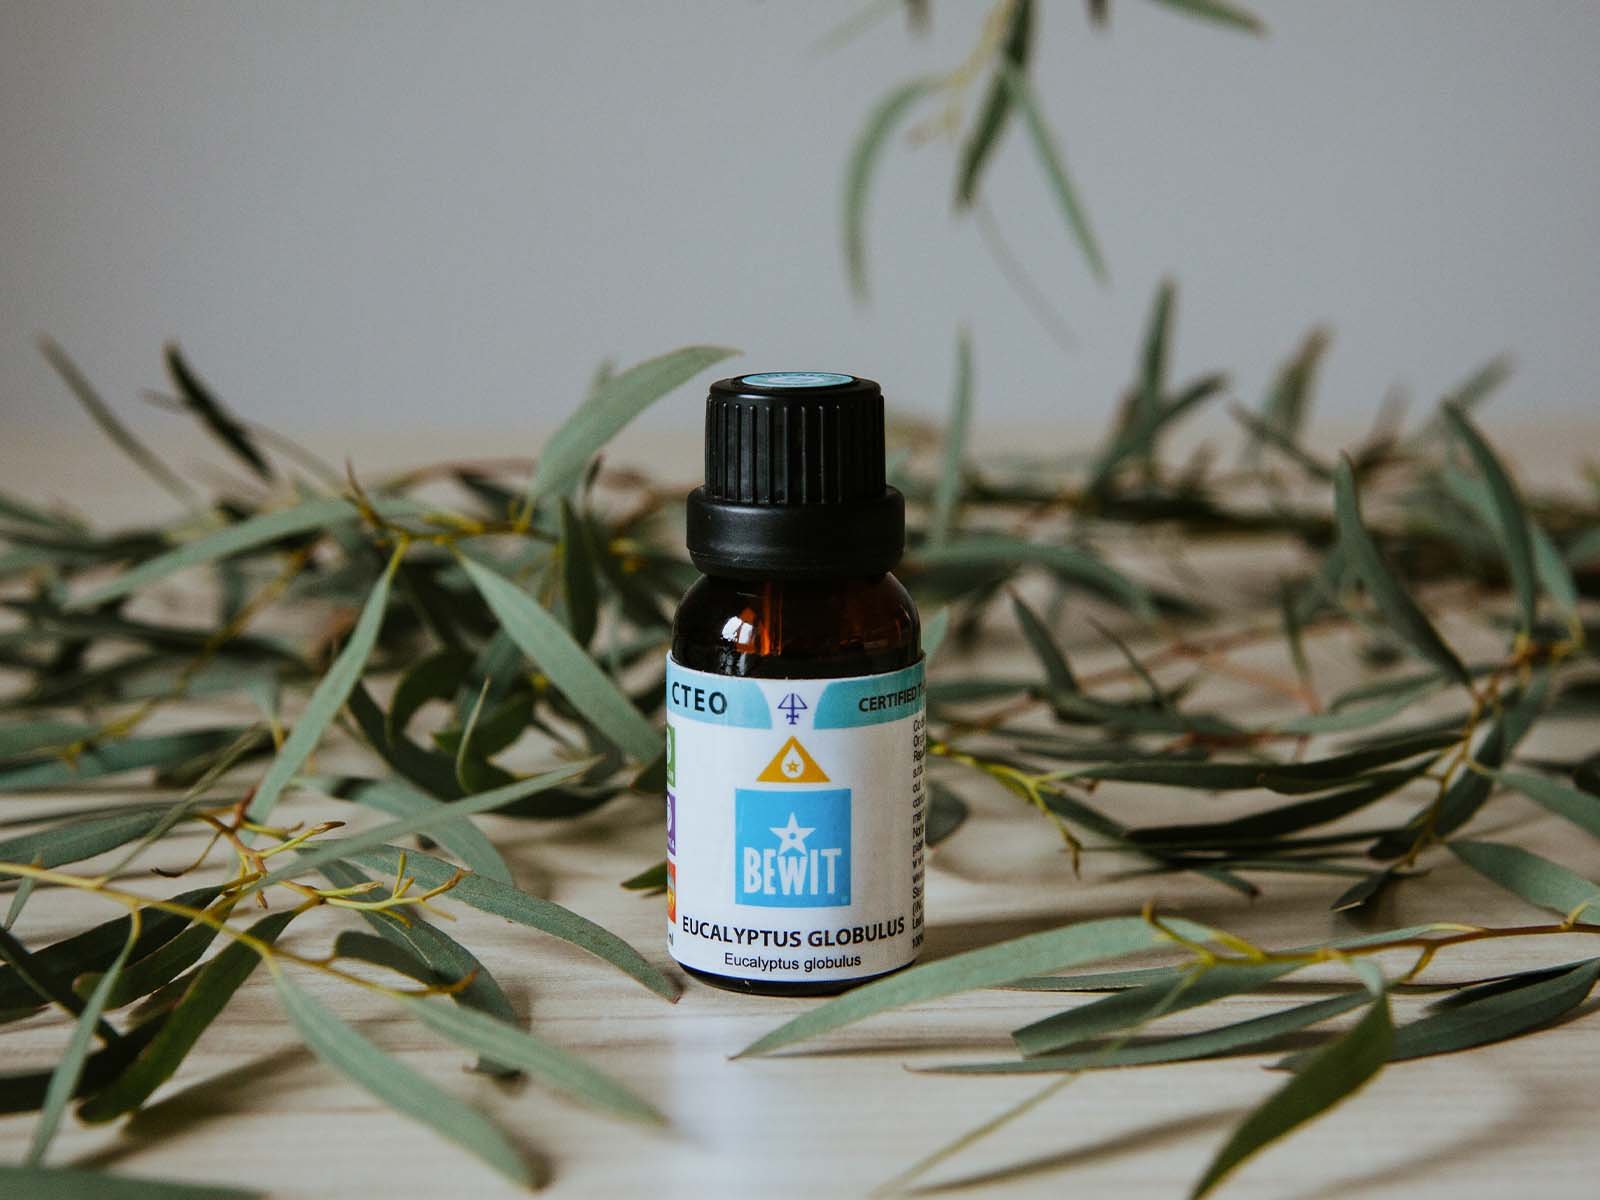 BEWIT Eucalyptus globulus - This is a 100% pure essential oil - 6